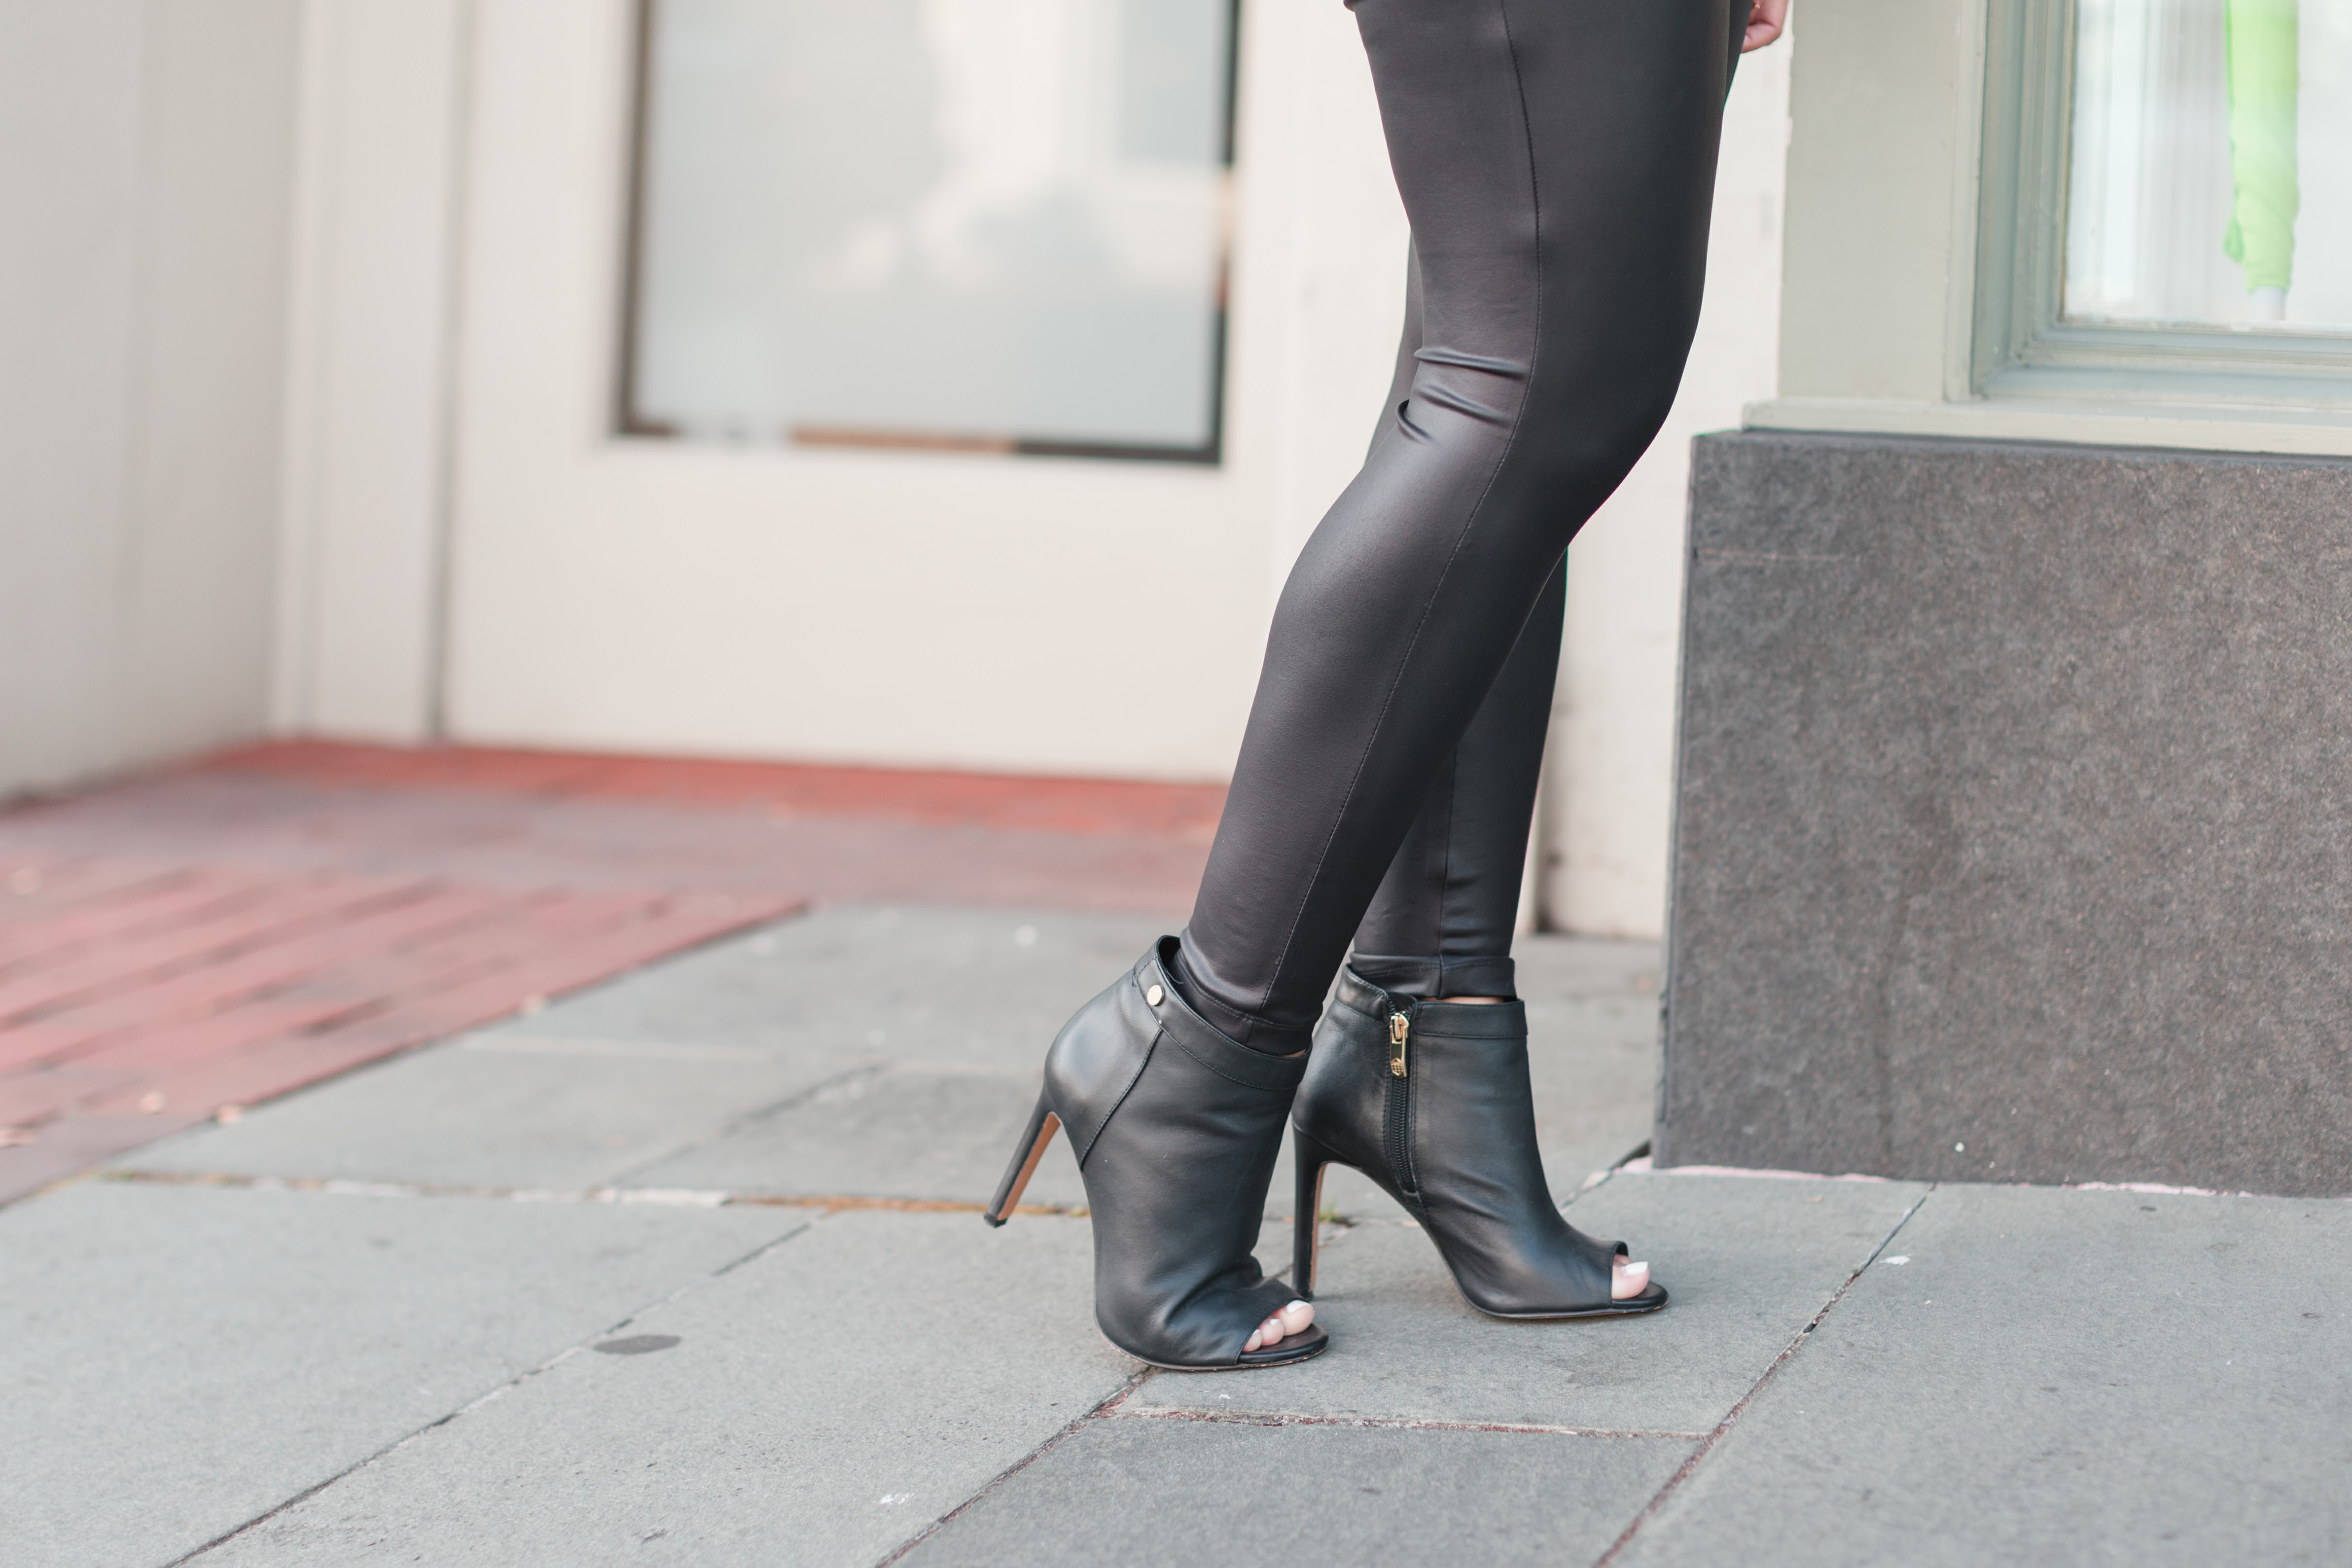 Vince Camuto Booties - Stylista Esquire - @stylistaesquire